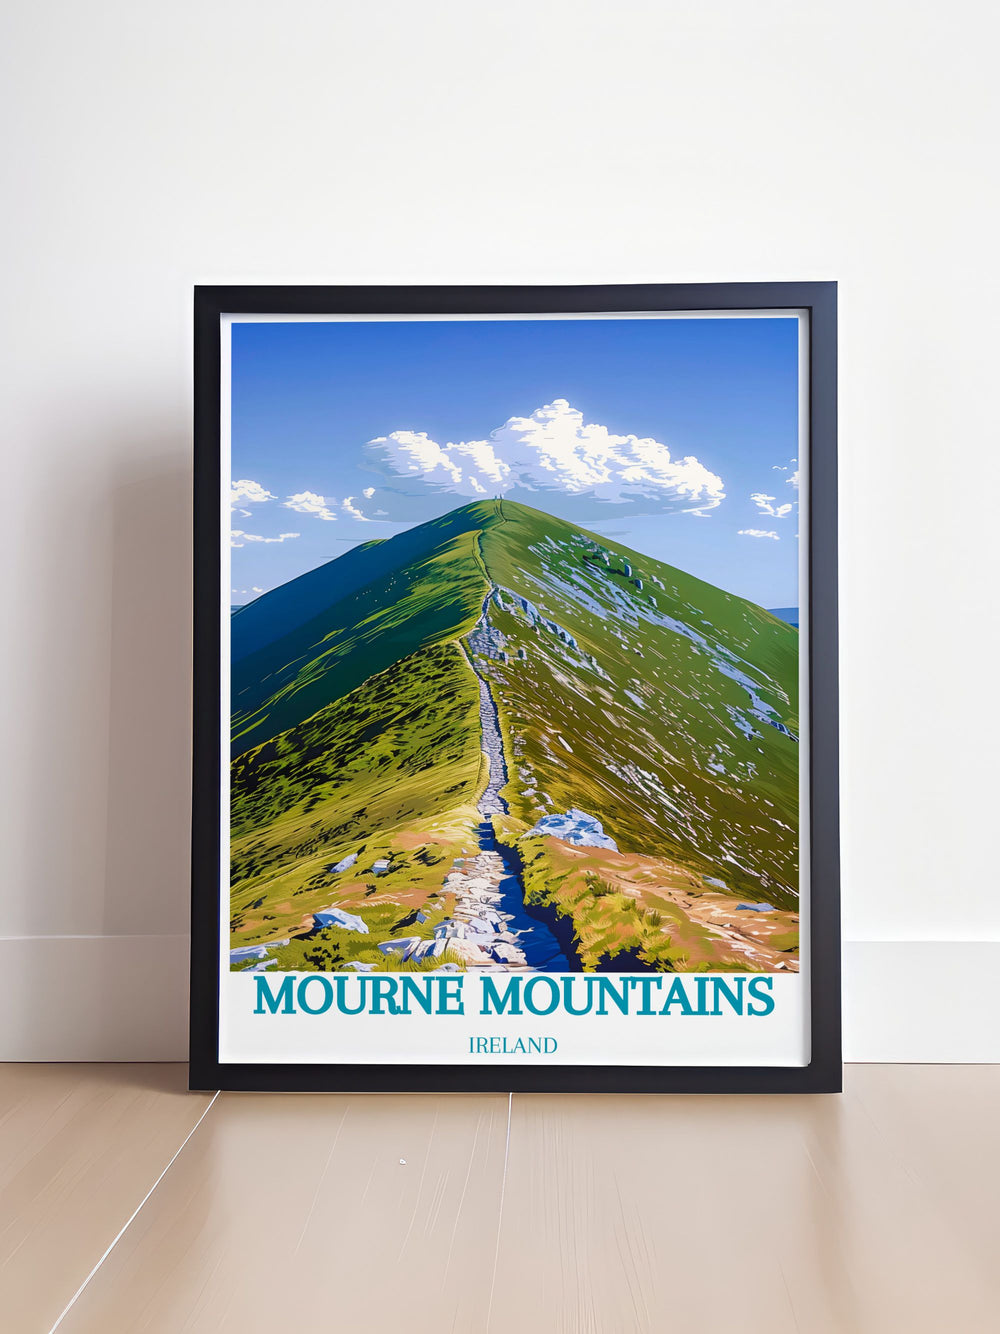 This travel poster beautifully depicts the dynamic landscapes and natural charm of the Mourne Mountains, ideal for adding a touch of scenic beauty and outdoor adventure to any room.